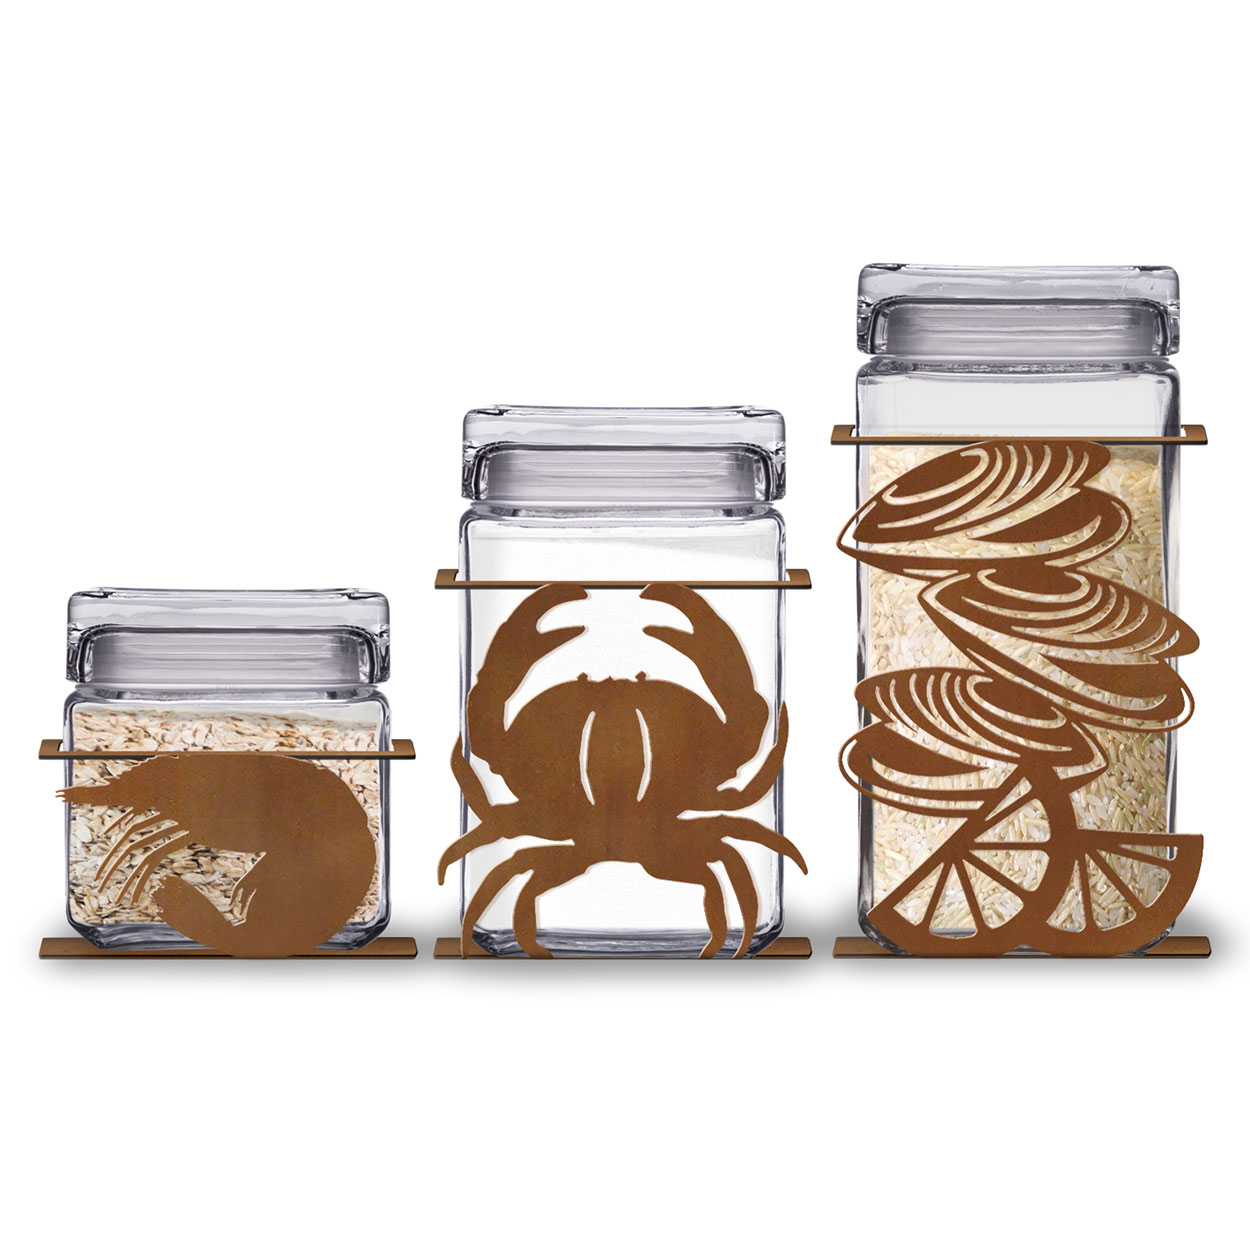 620027R - Clambake 3-Piece Kitchen Canister Set in Rust Patina